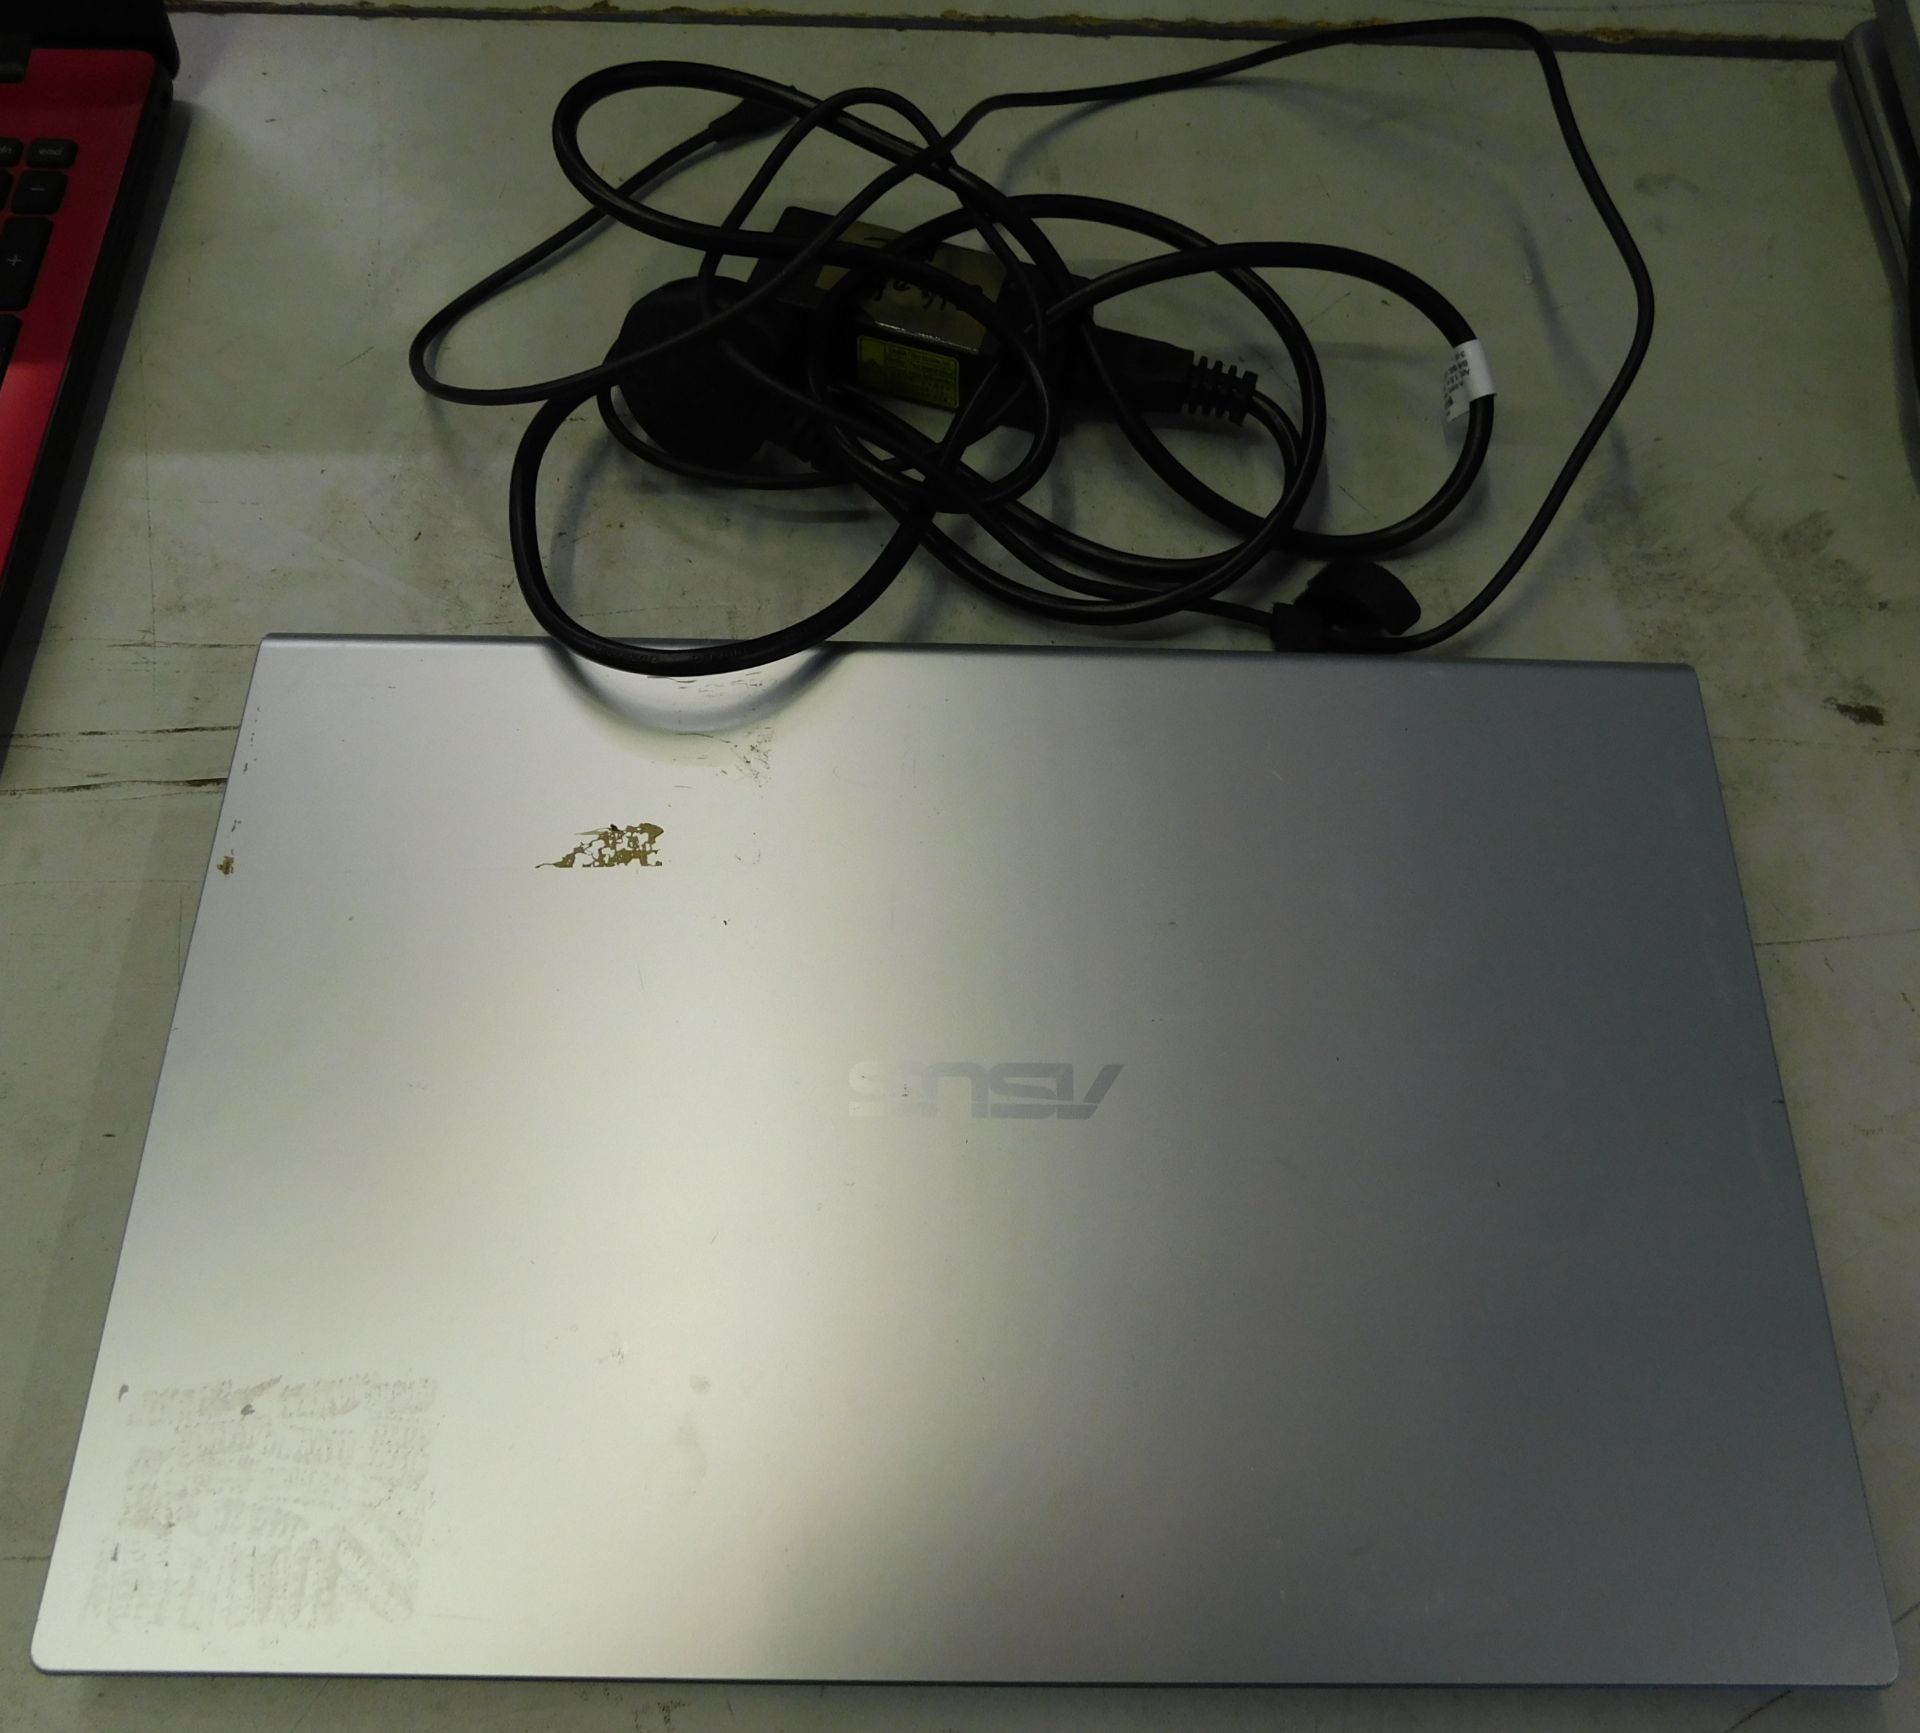 Asus X515J Laptop (No HDD) (Location: Stockport. Please Refer to General Notes) - Image 2 of 4